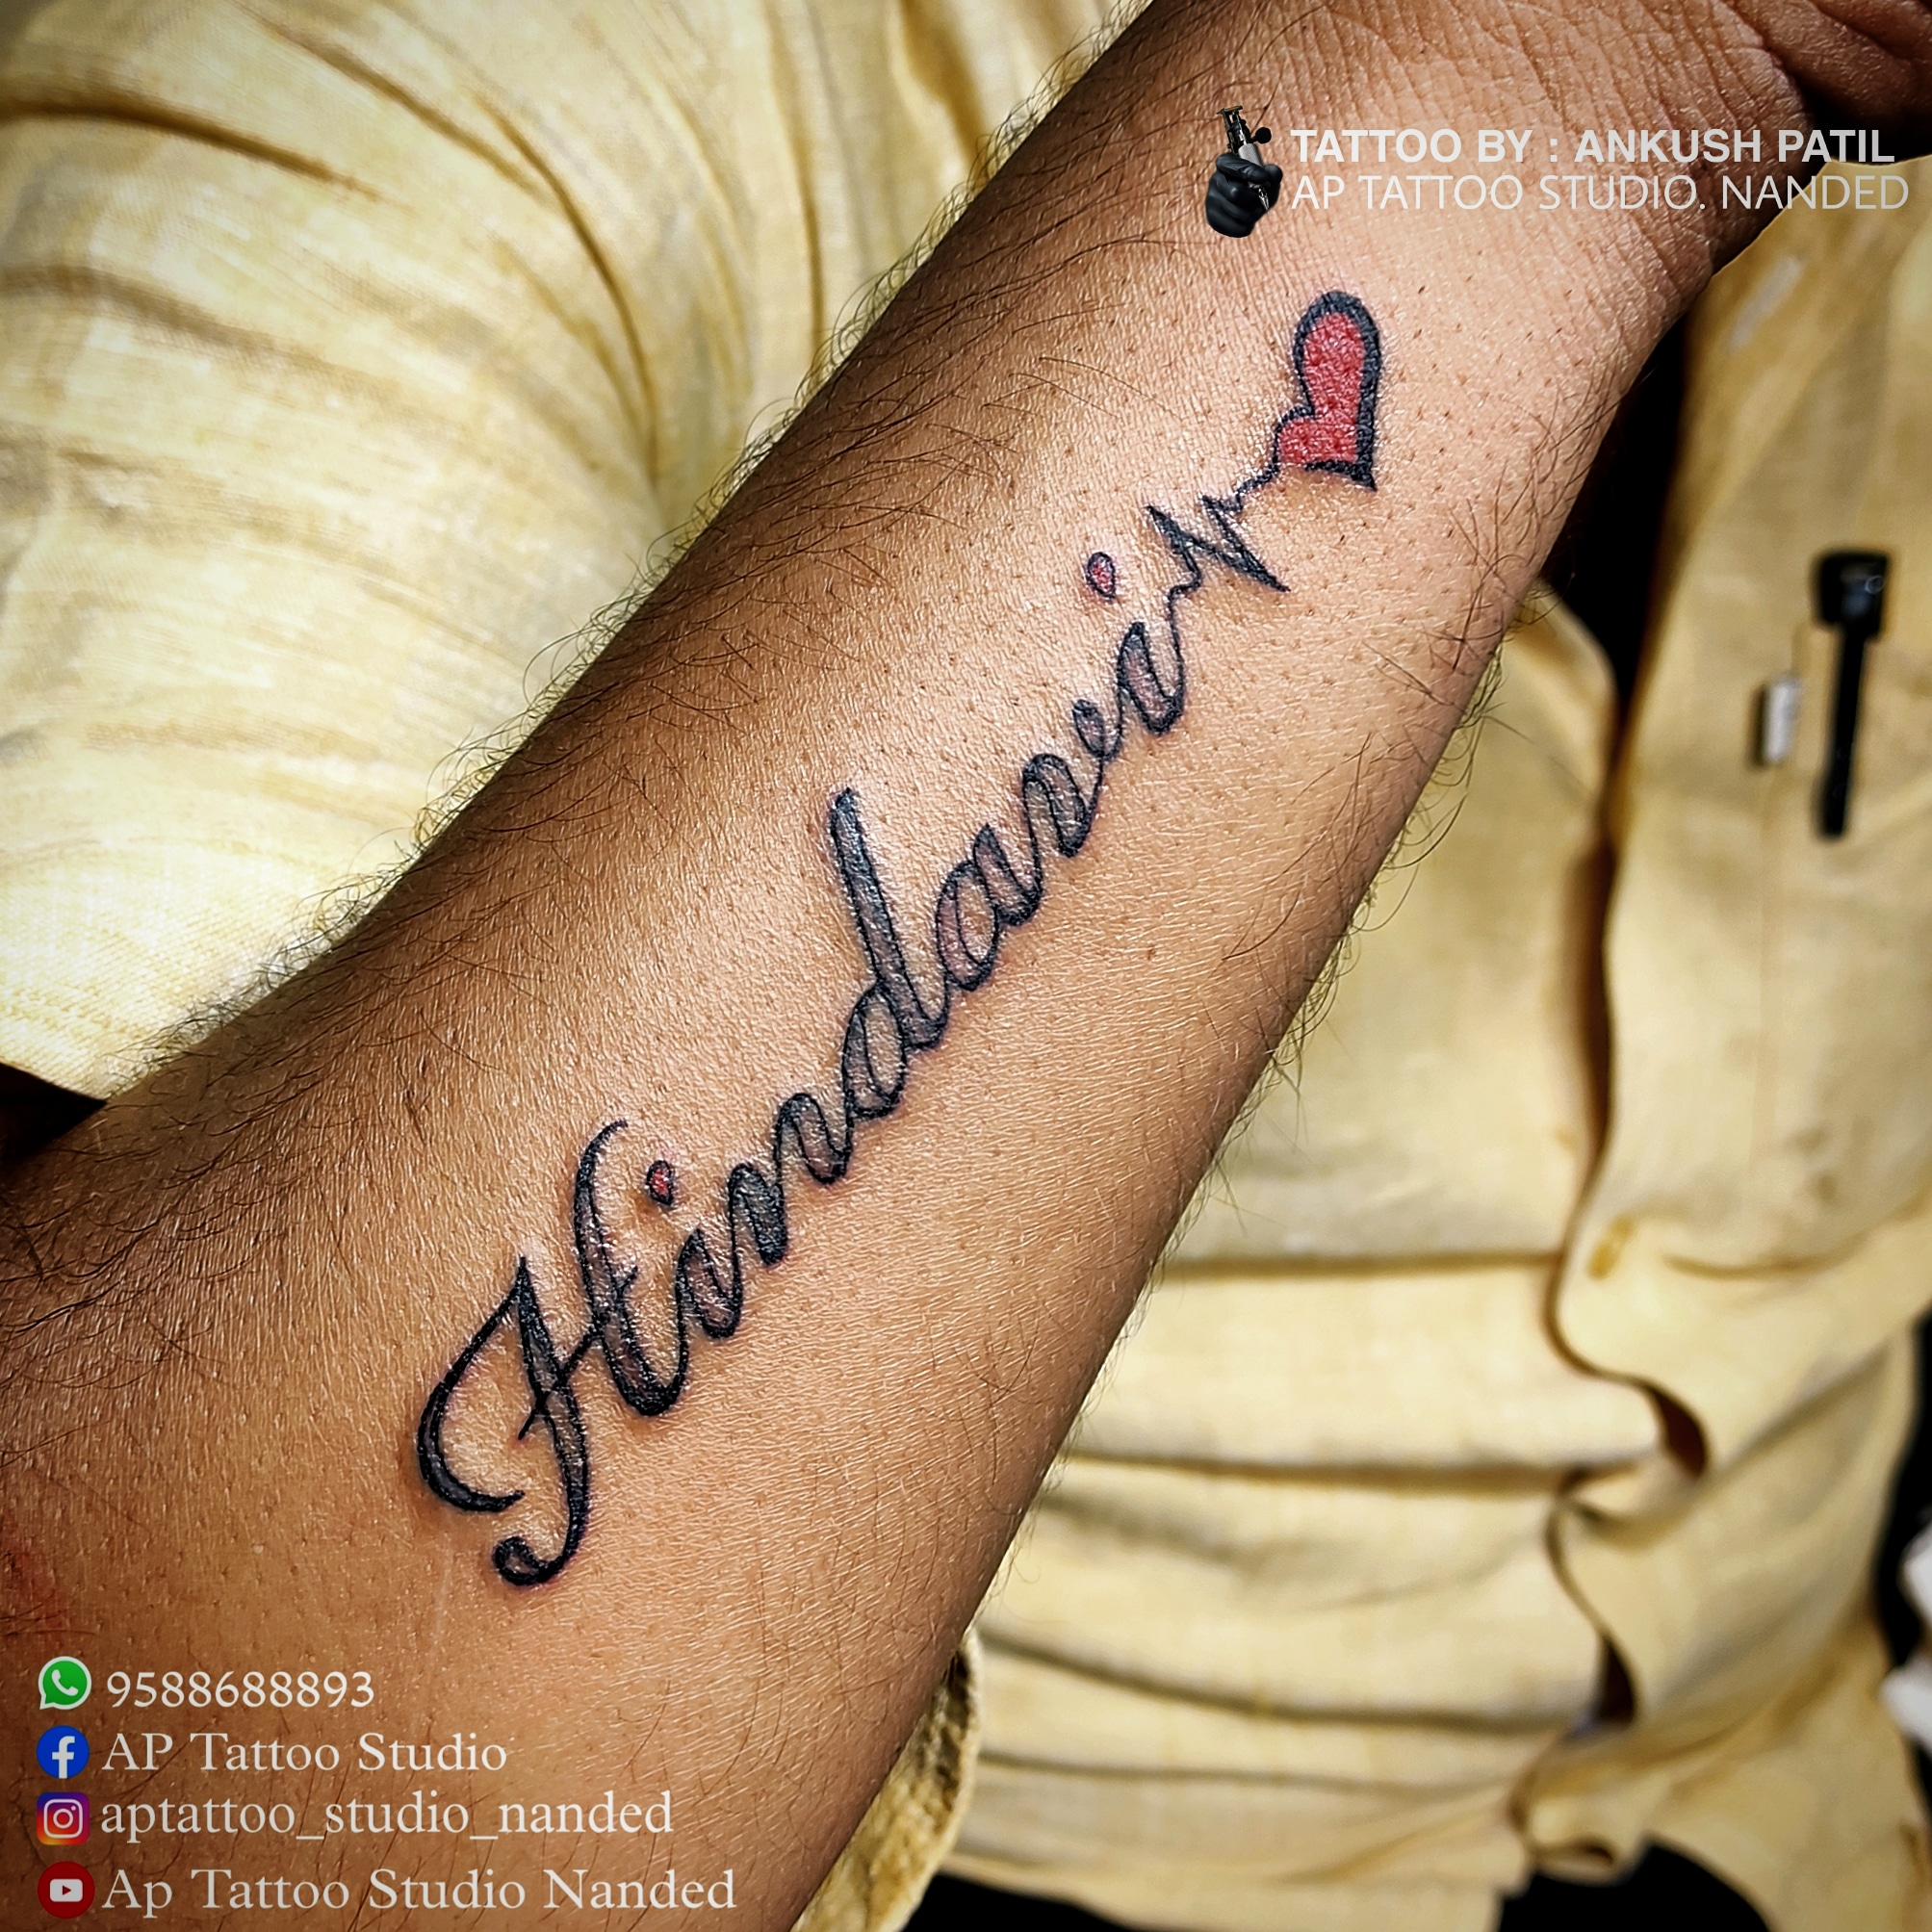 PRASHANT JADHAV on Twitter Cover up tattoo Covered old name Tattoo by new  name Tattoo Today httpstco6UD9snFgmm  Twitter